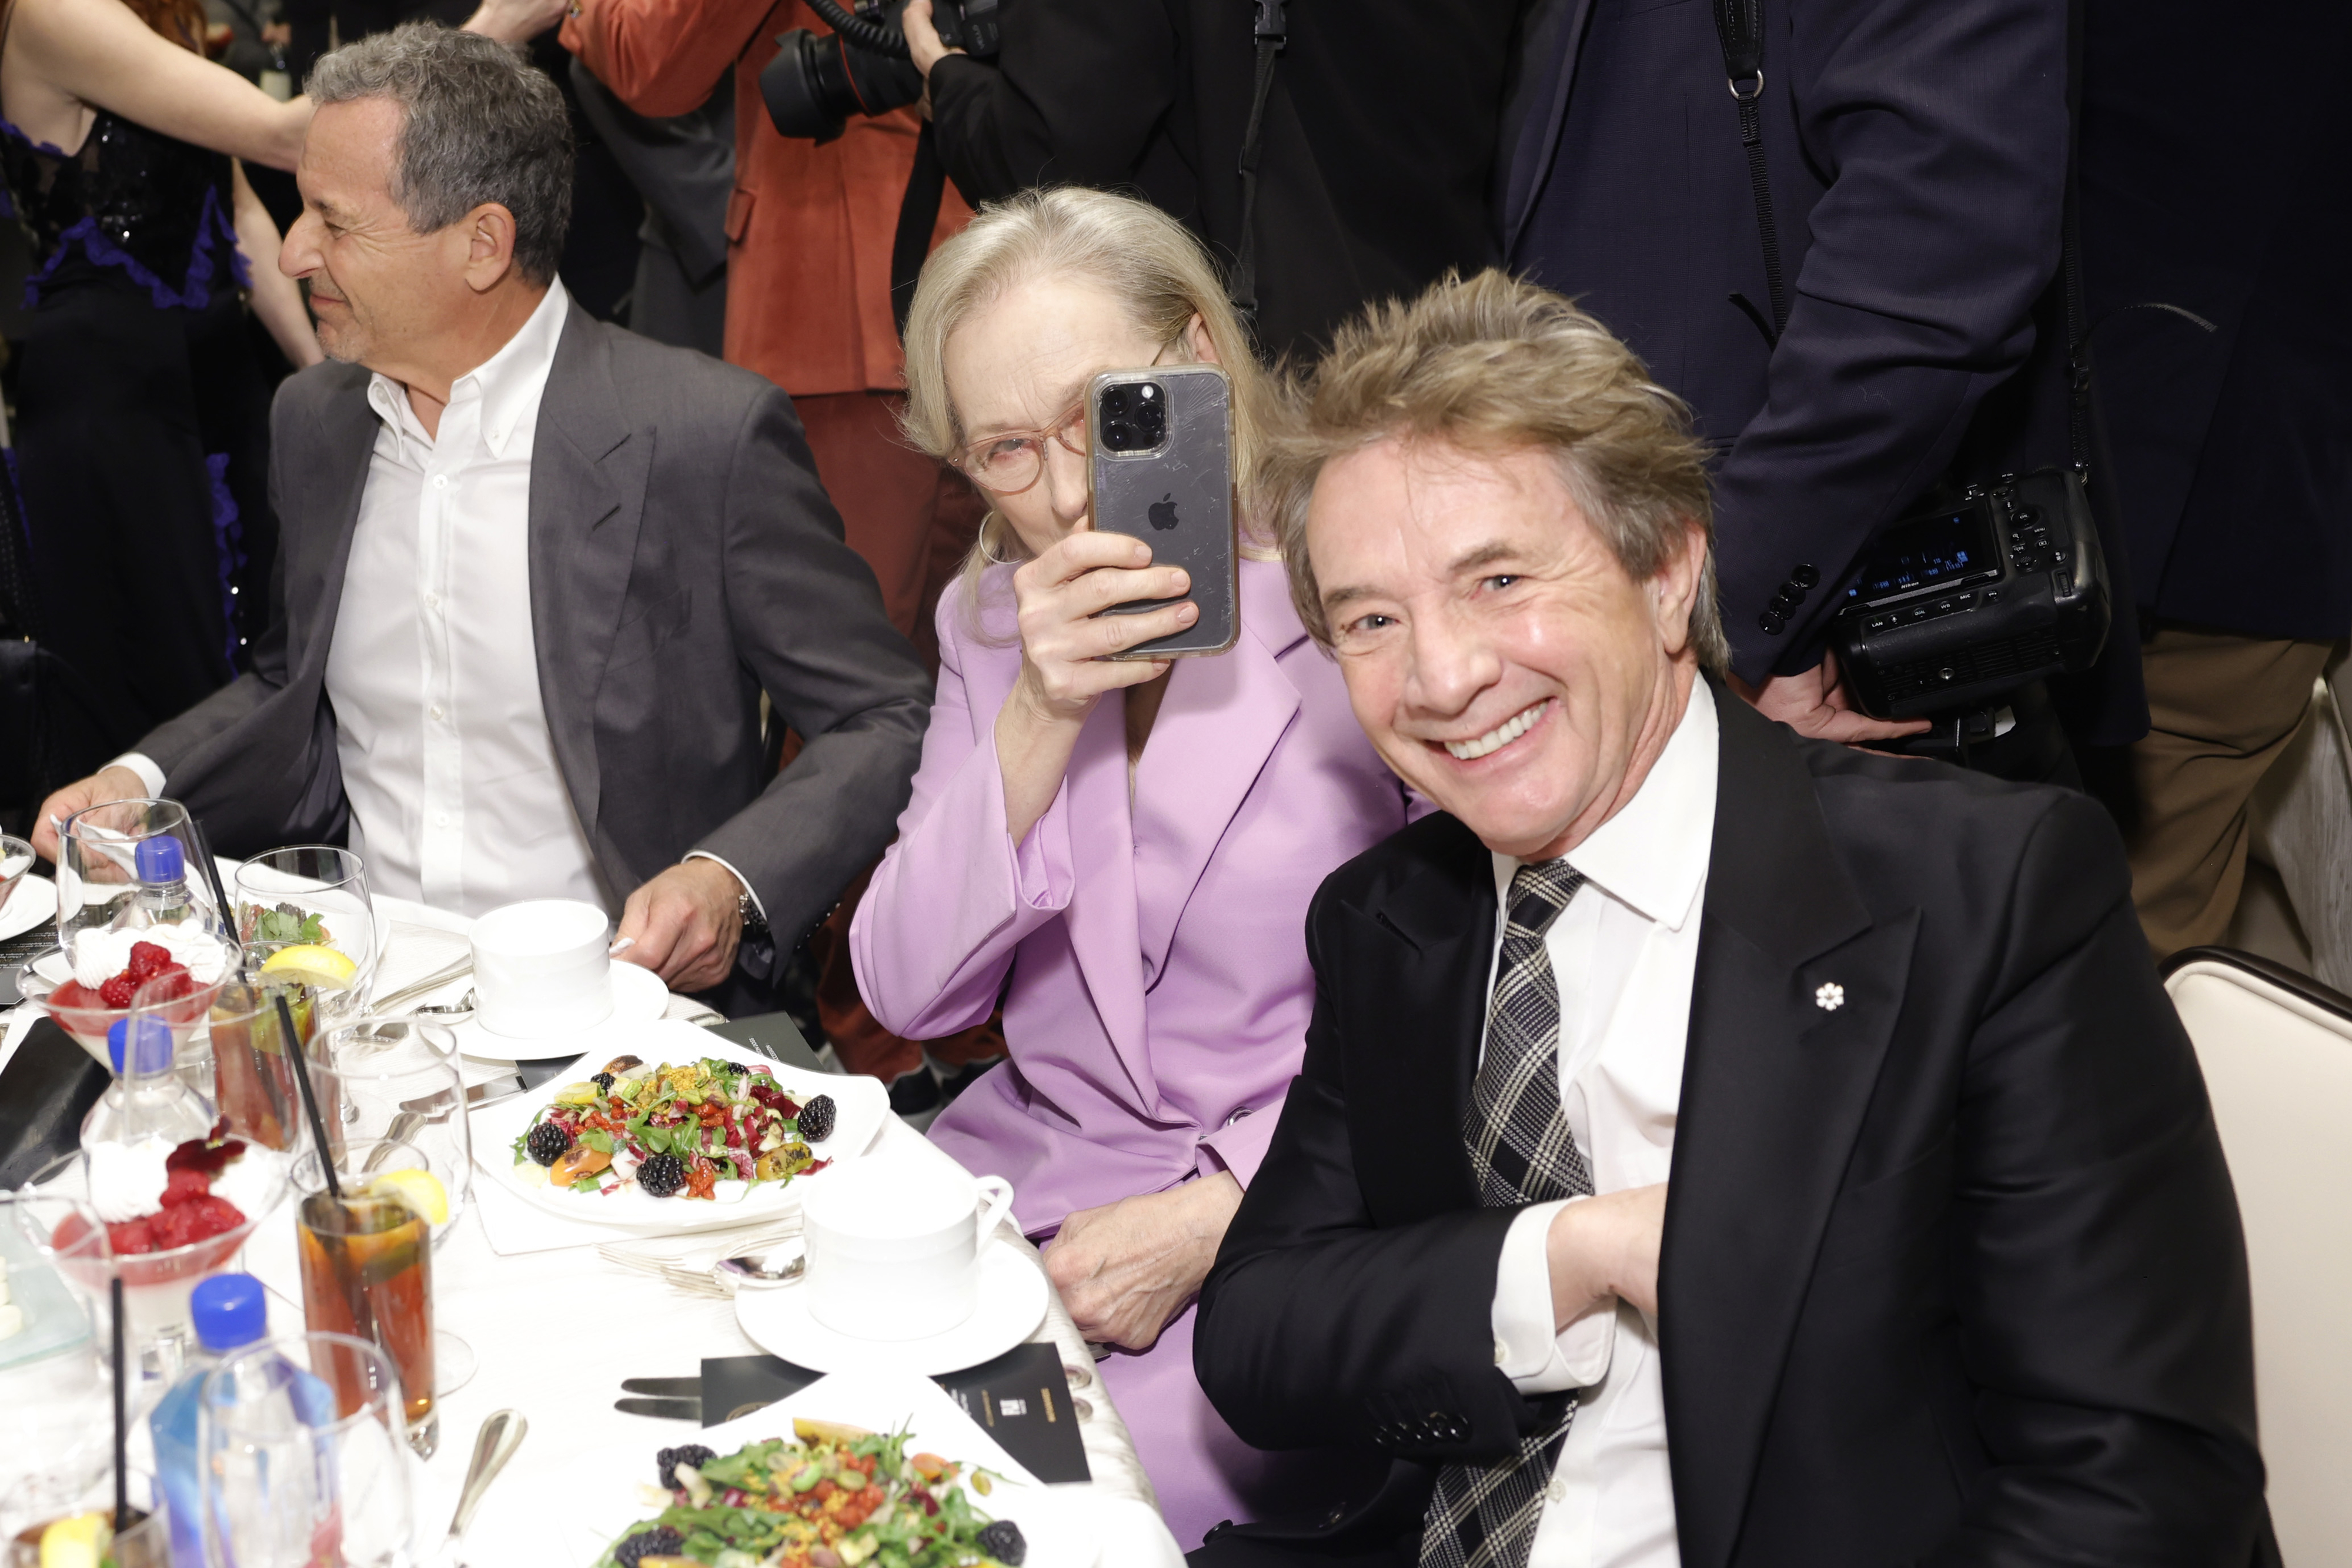 Two individuals at a table, one capturing a selfie, other smiling at the camera, amidst a social gathering